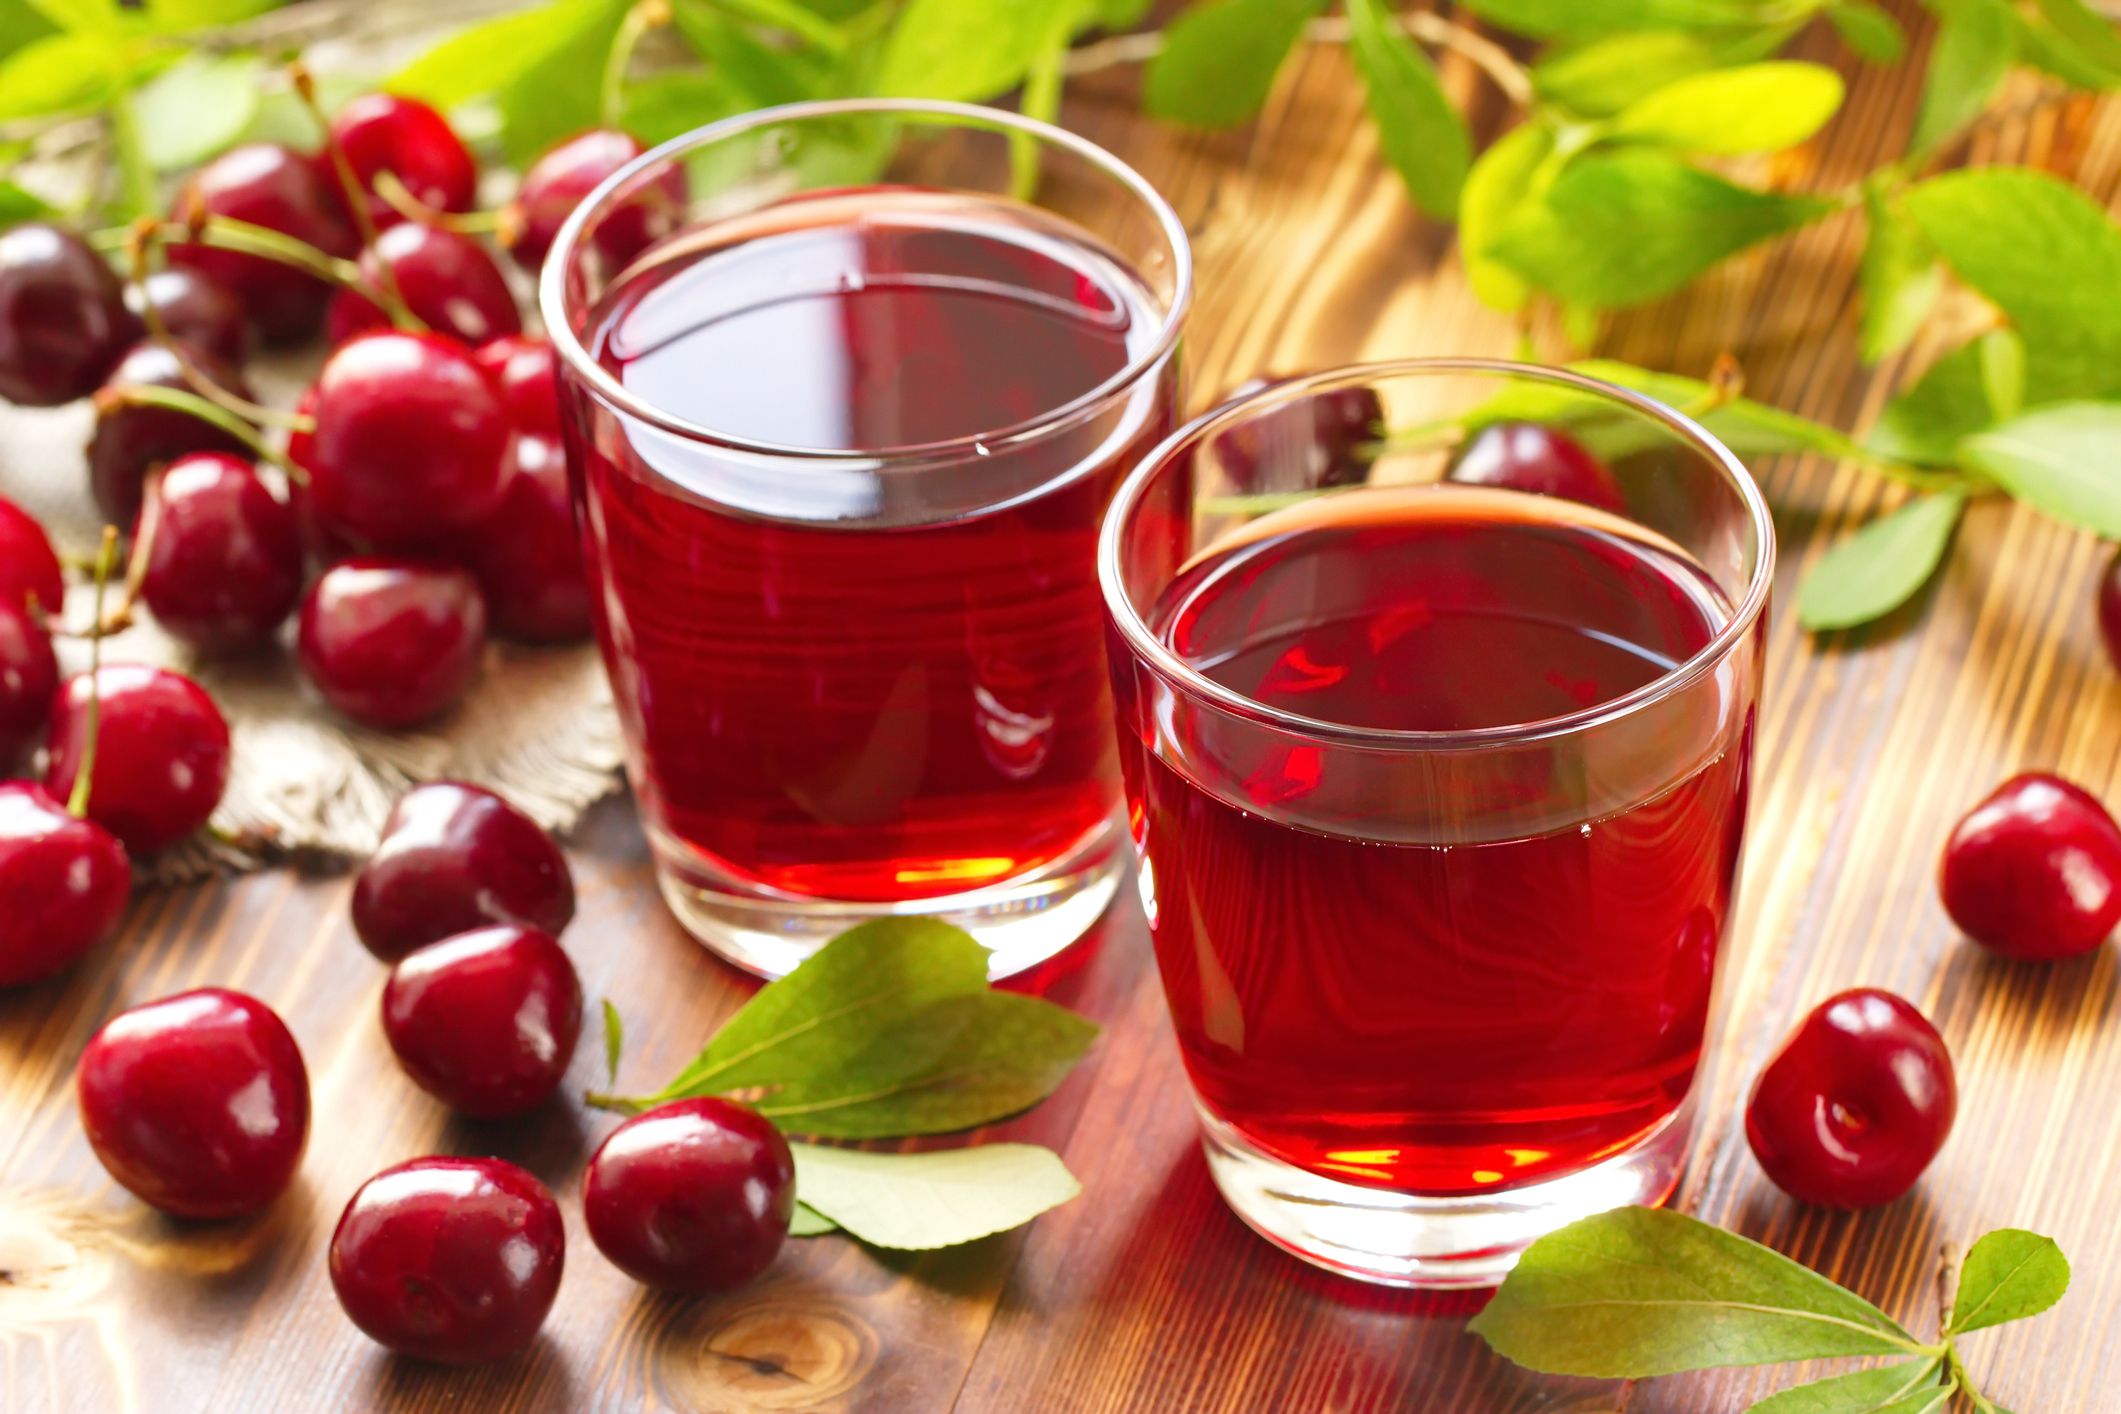 Health Benefits of Cherry Juice for Arthritis and Gout